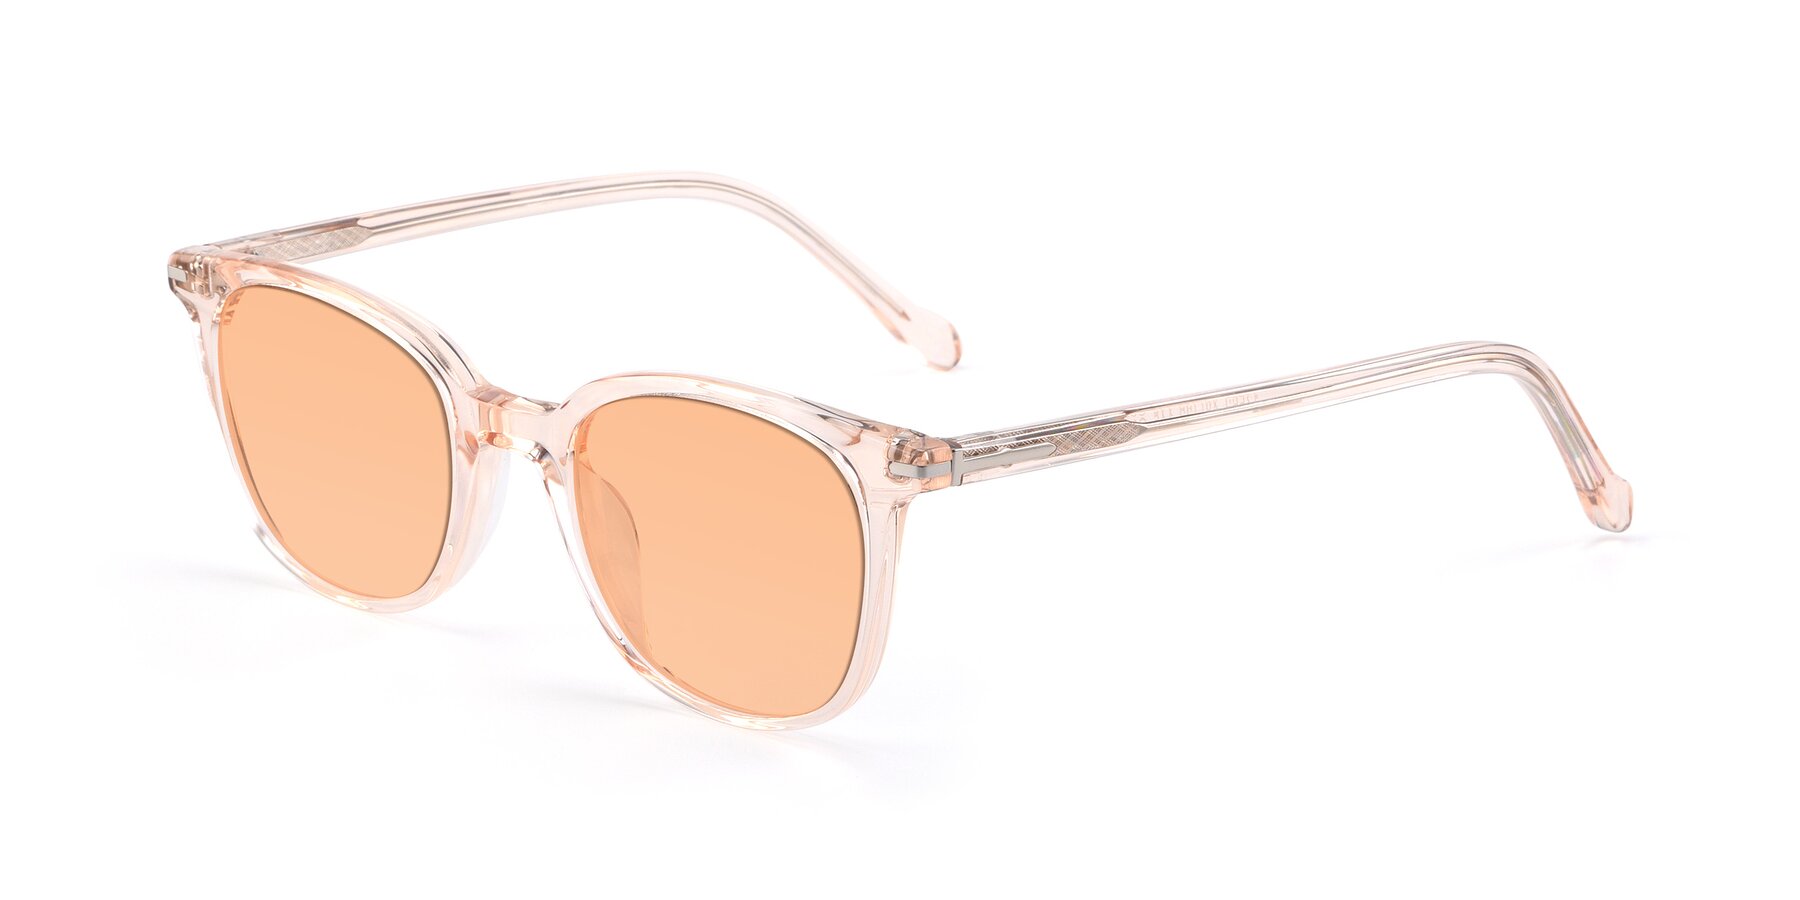 Angle of 17562 in Transparent Pink with Light Orange Tinted Lenses